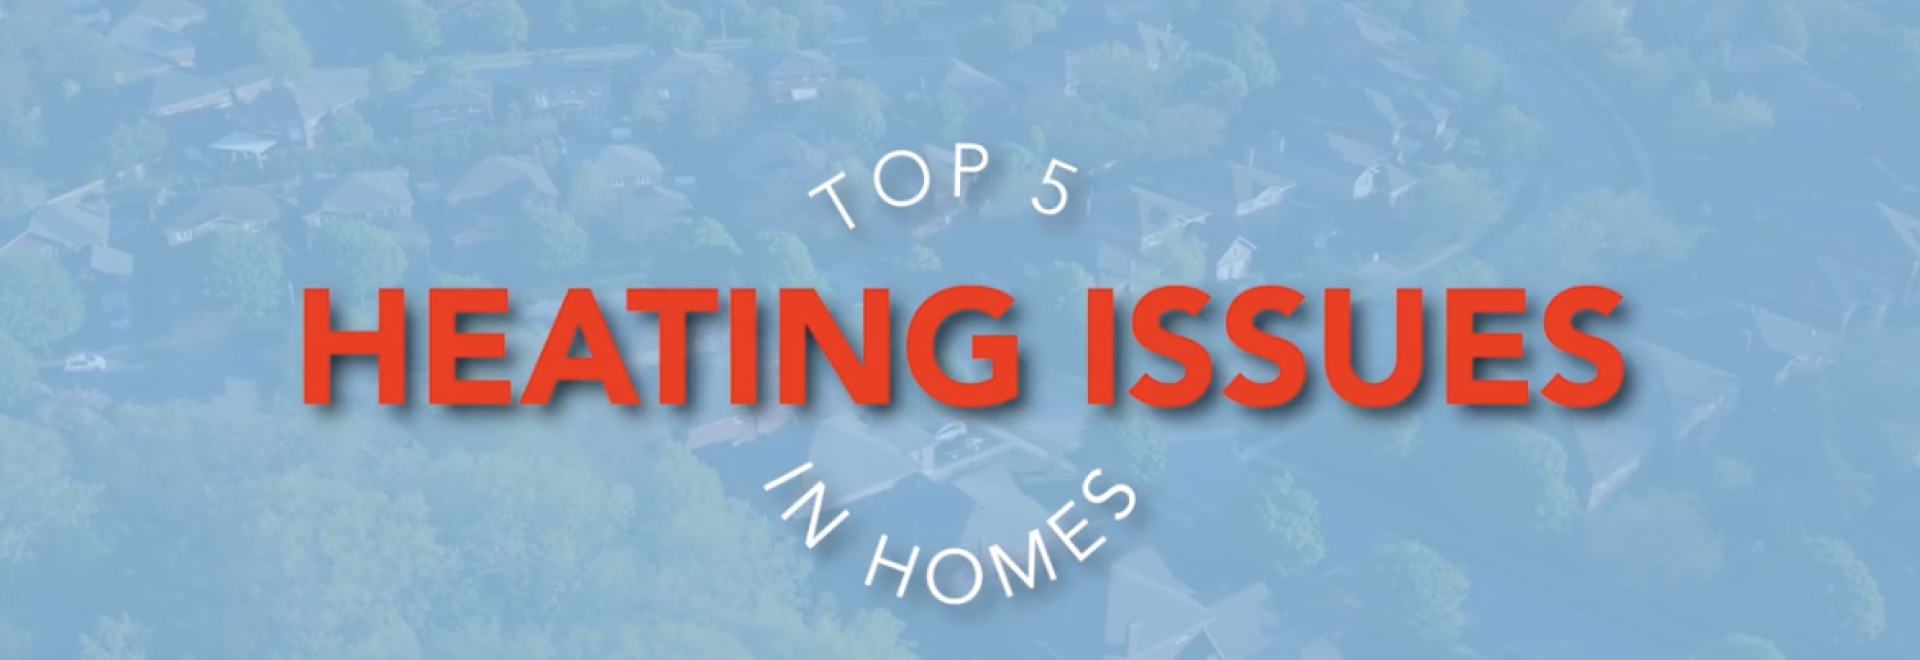 top 5 heating issues in homes featured image